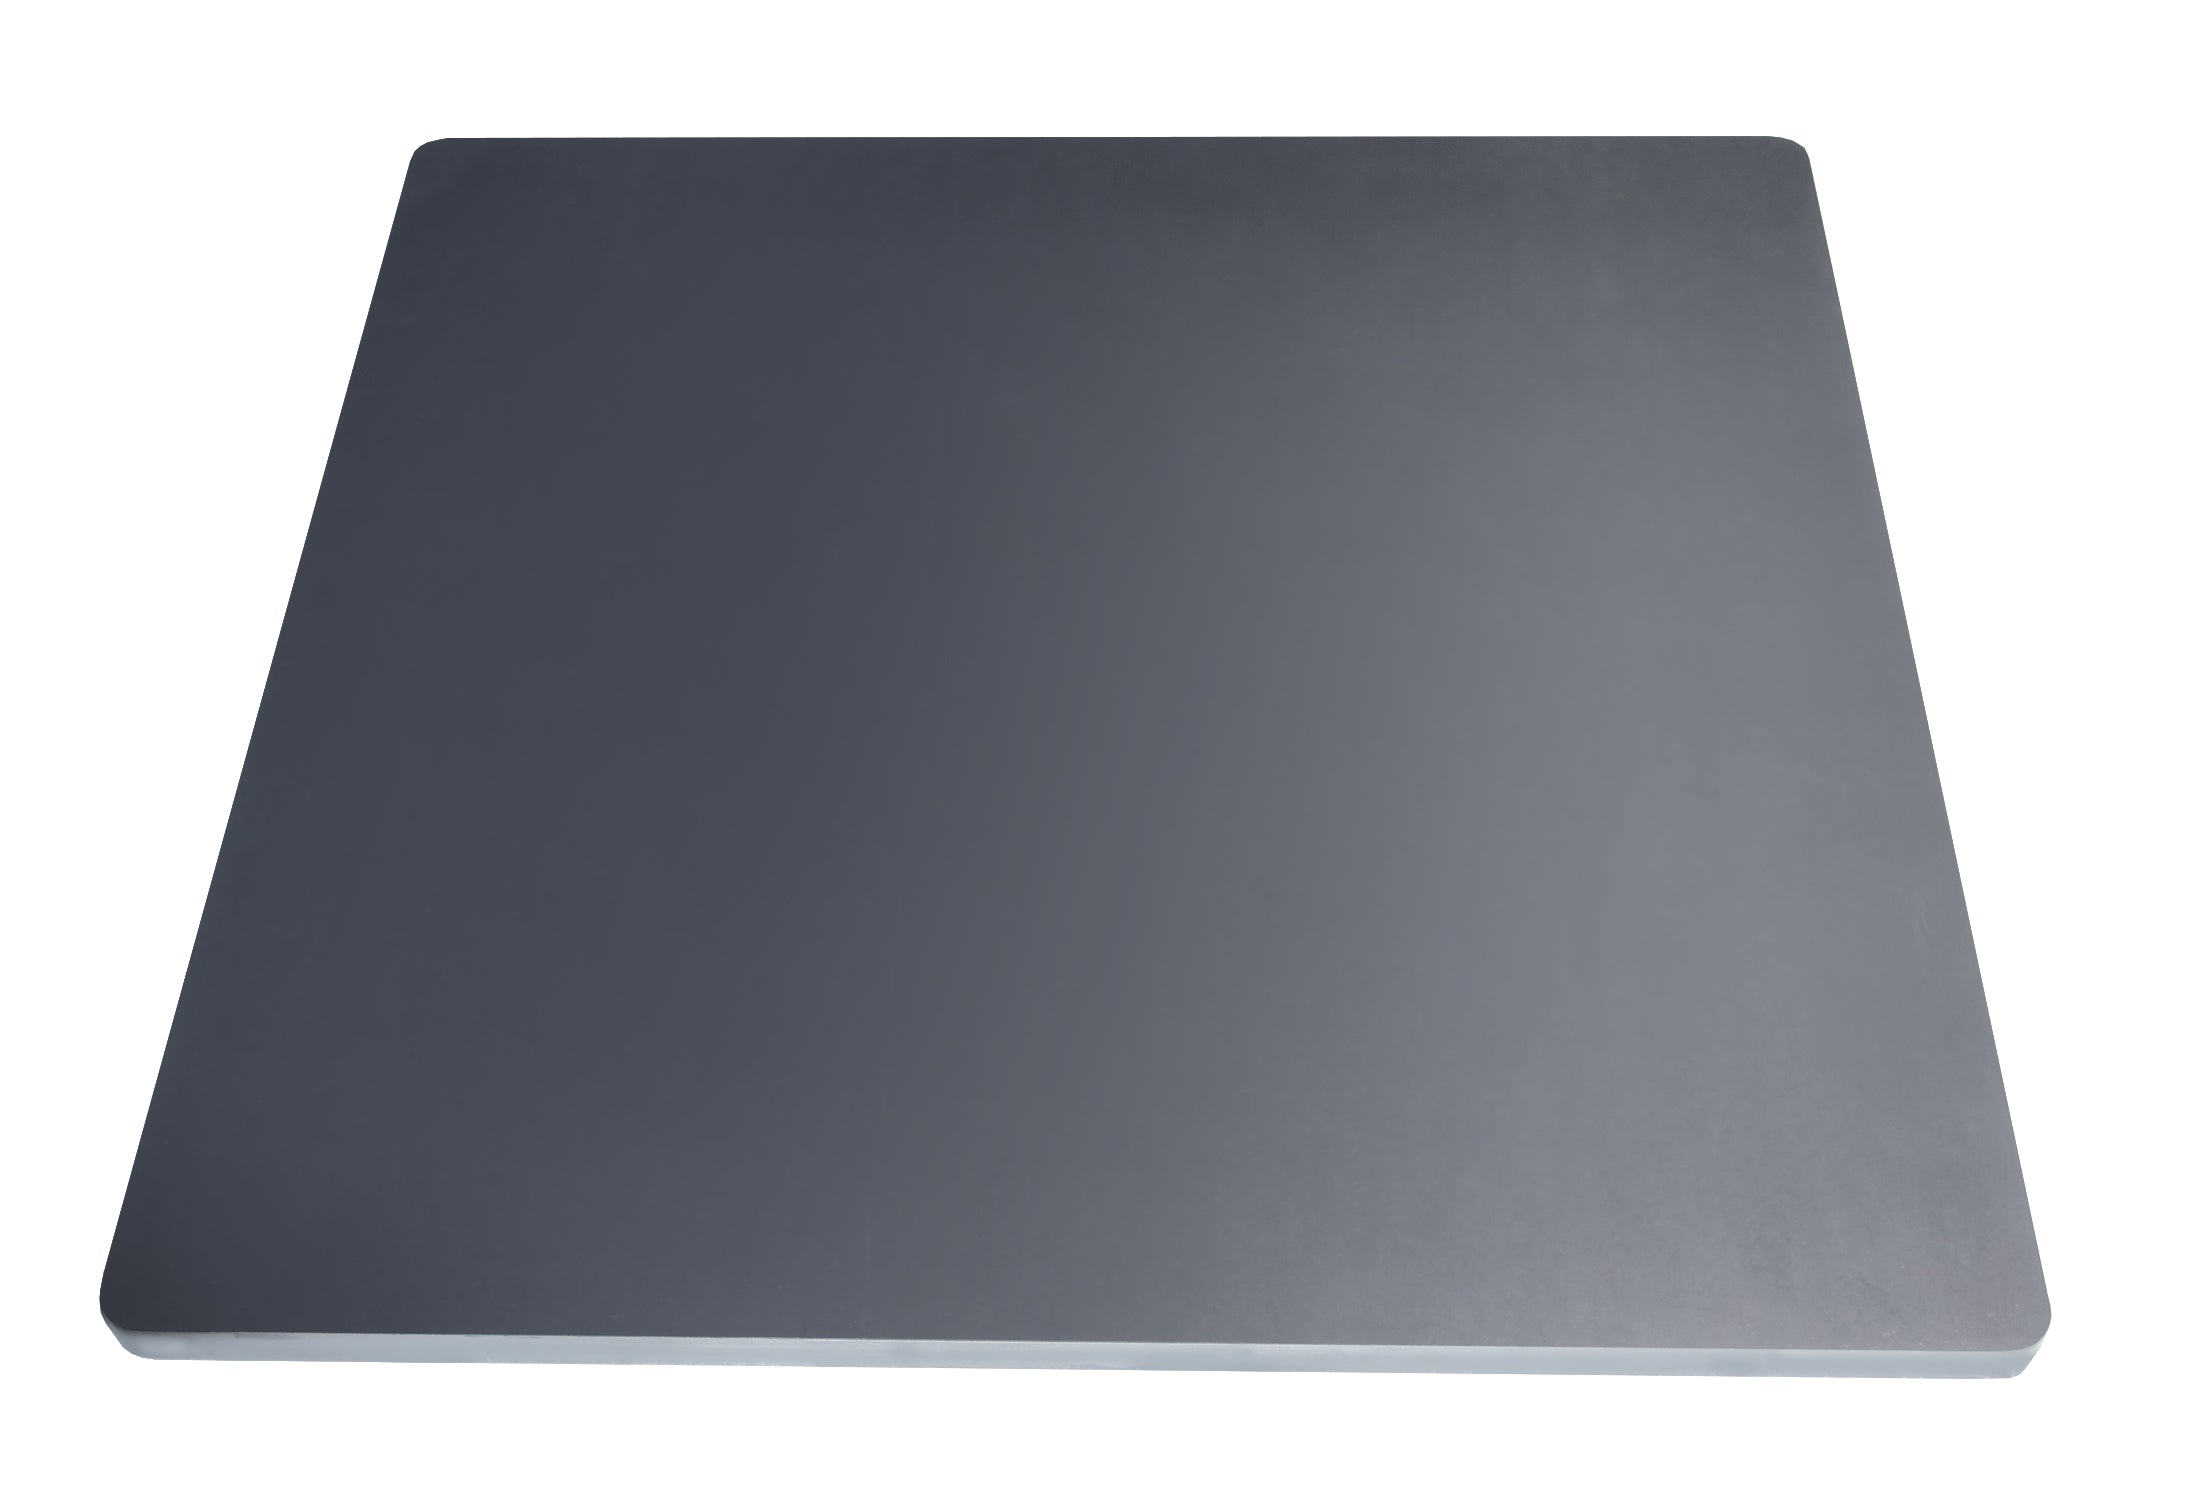 14x16x1/4"(0.25) - No Thumb Holes-Baking oven steel & Pizza steel -Pizza Stone- No Holes same great steel!